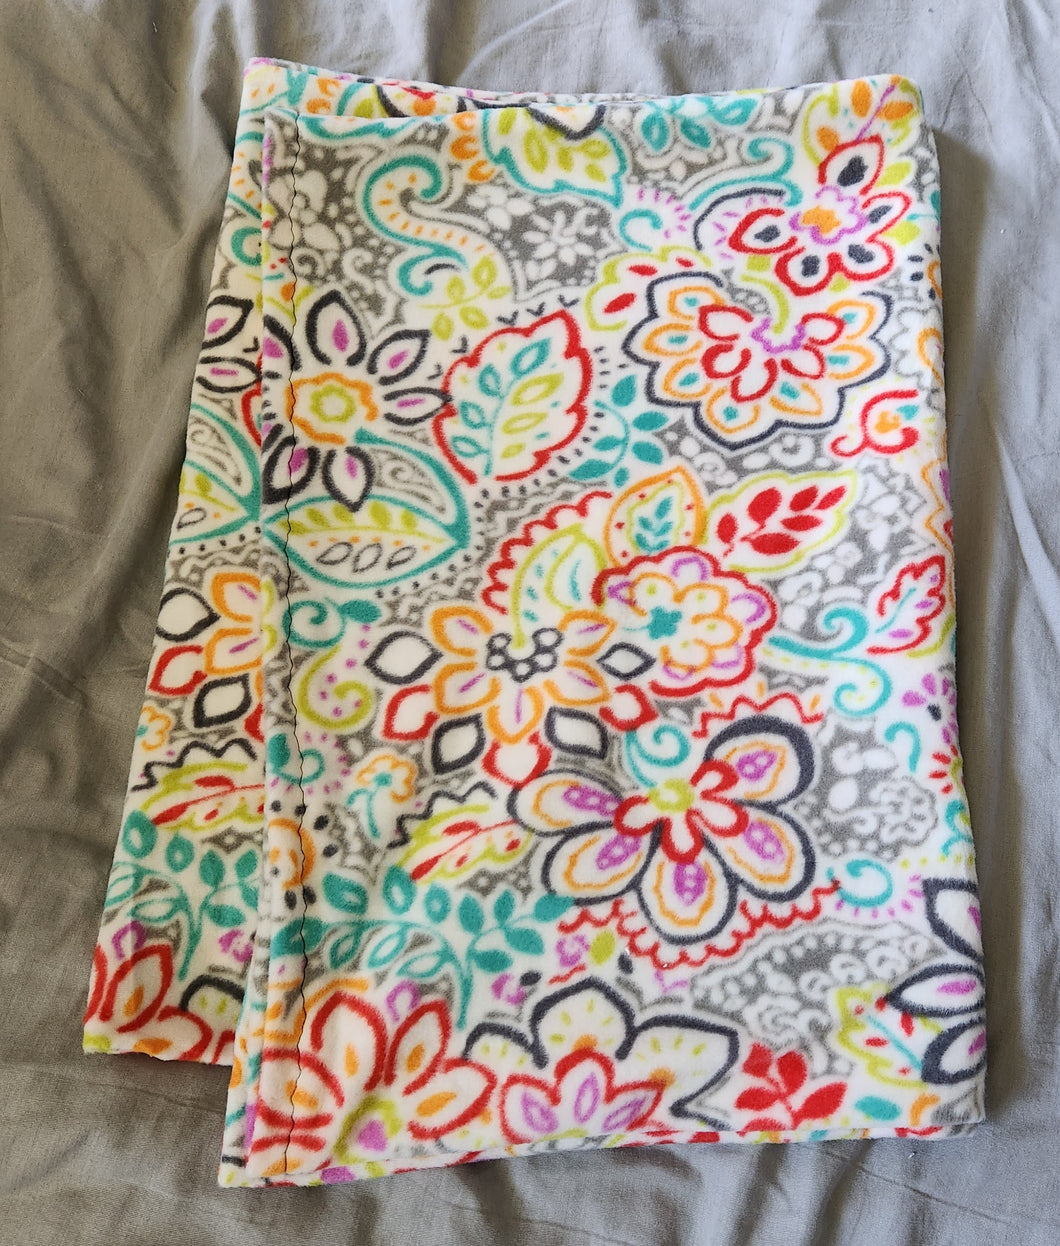 Body Pillowcase - Floral, Neon colors and Grey on White Fleece